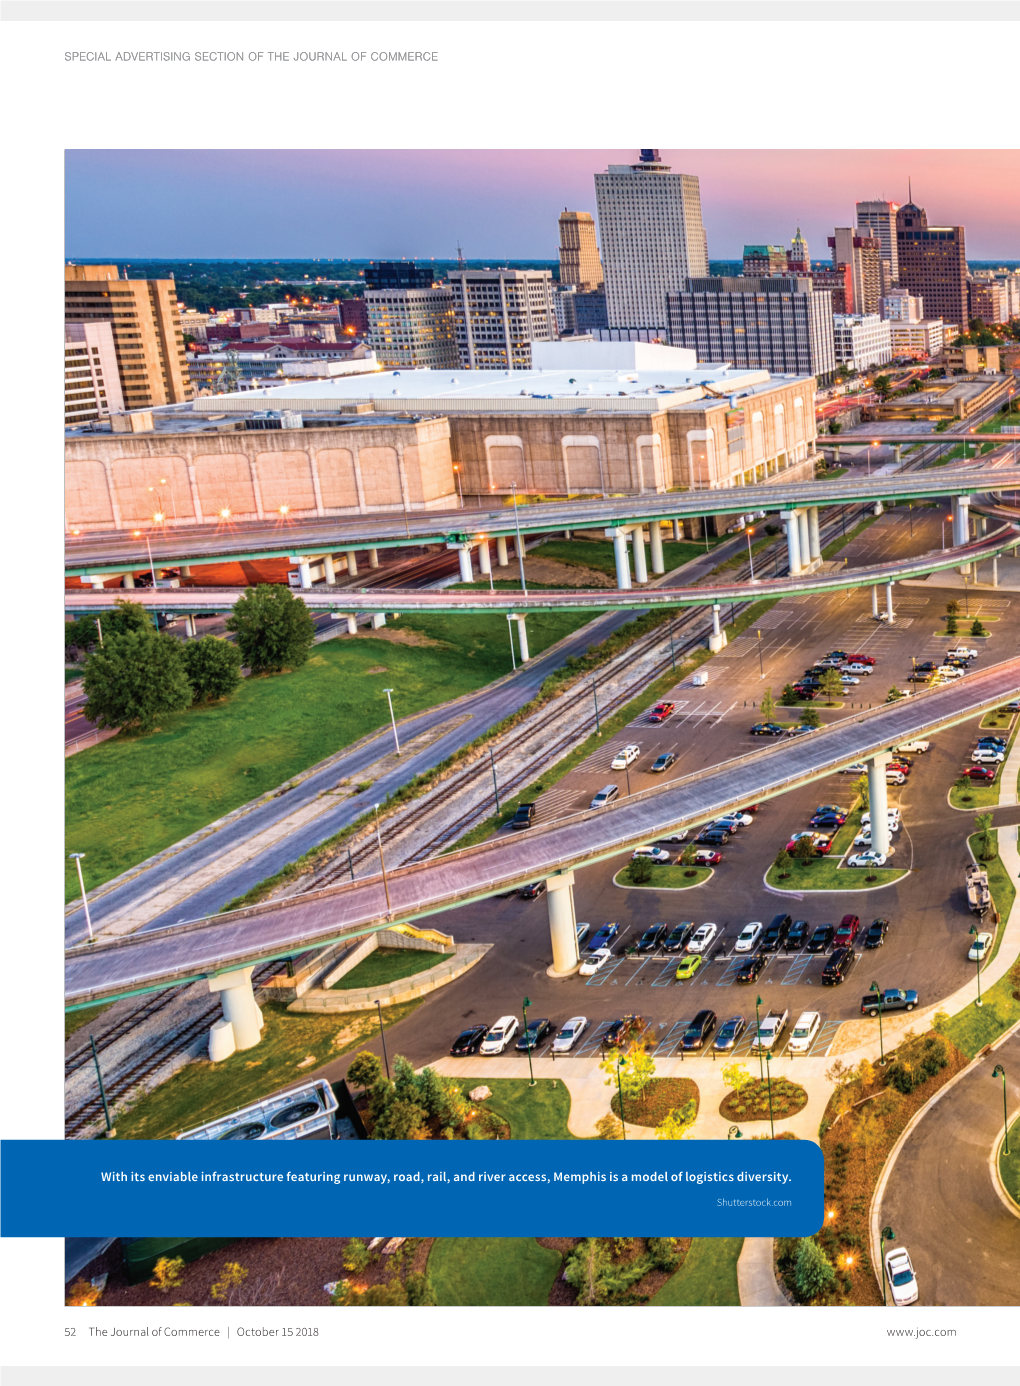 With Its Enviable Infrastructure Featuring Runway, Road, Rail, and River Access, Memphis Is a Model of Logistics Diversity